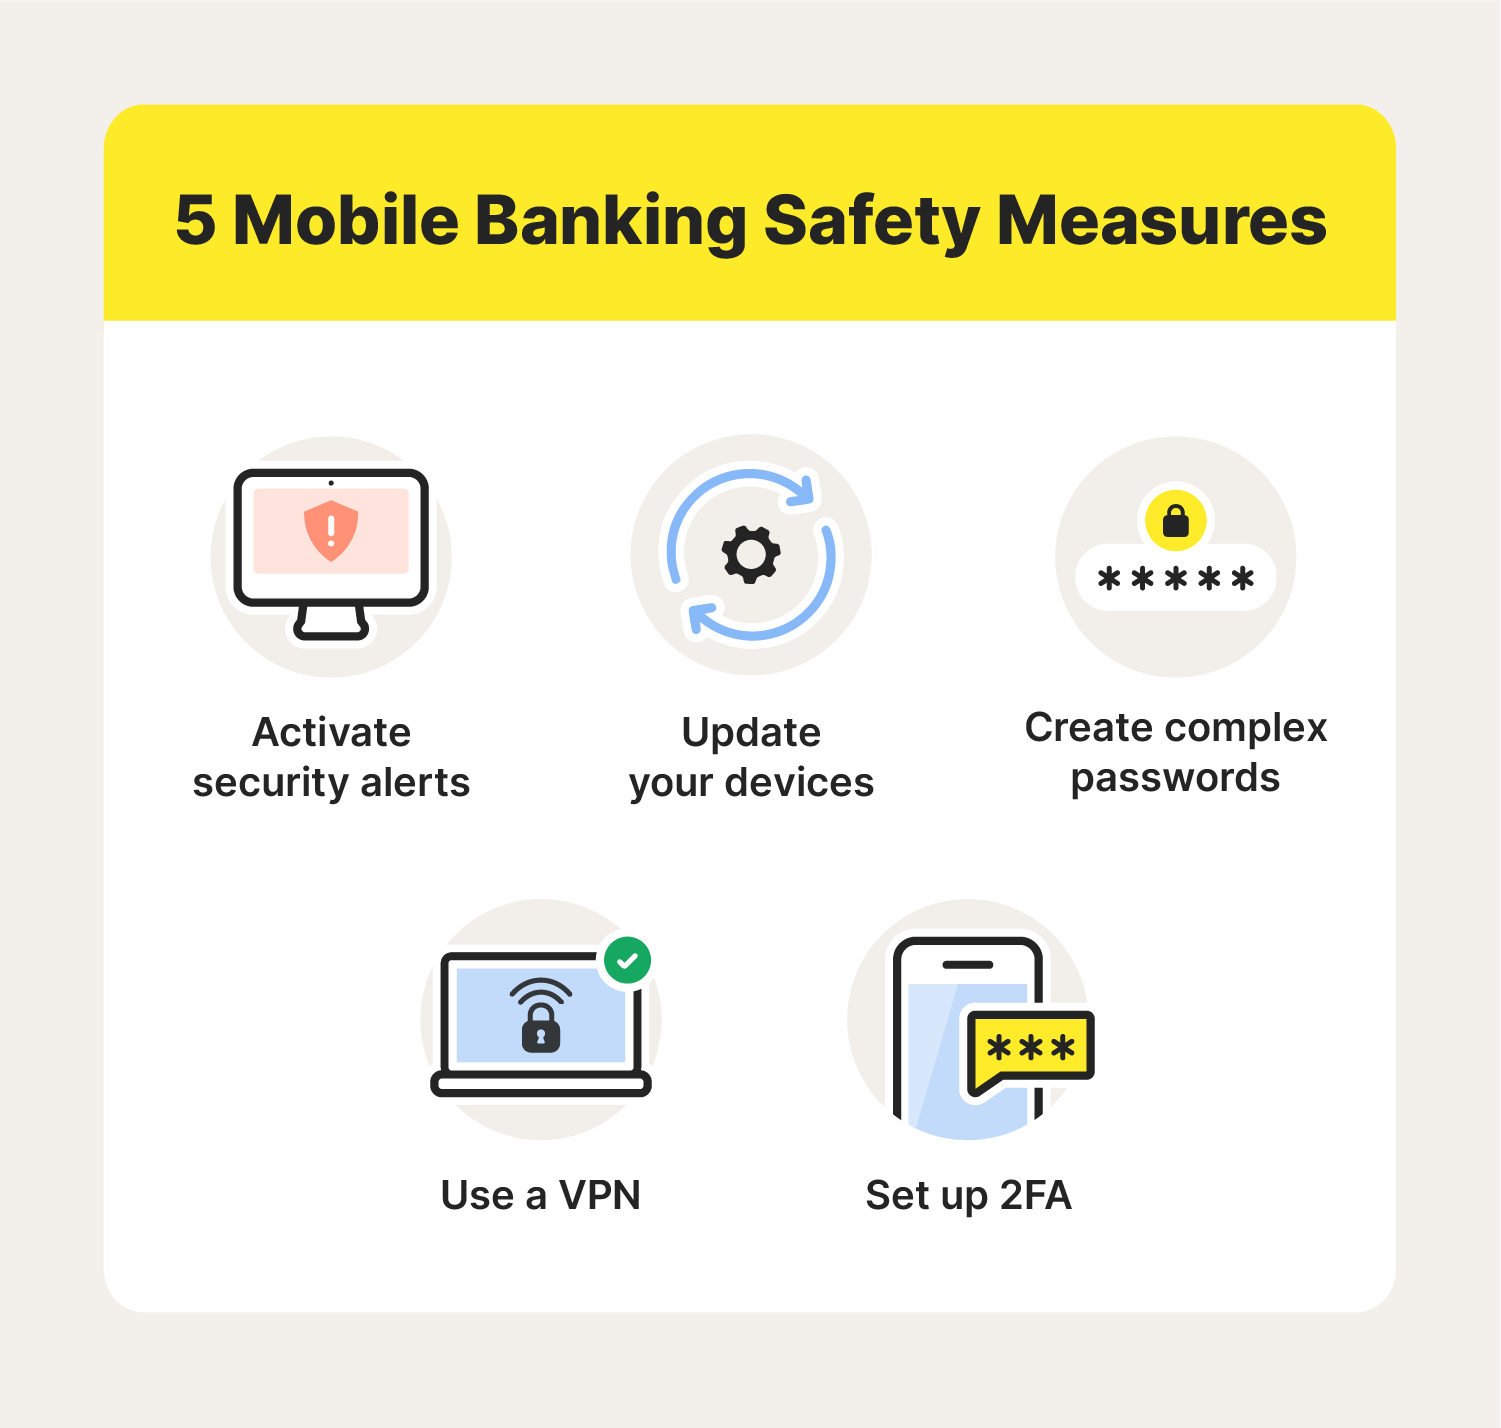 An image shares five distinct mobile banking safety measures to answer the question “Is mobile banking safe?”.